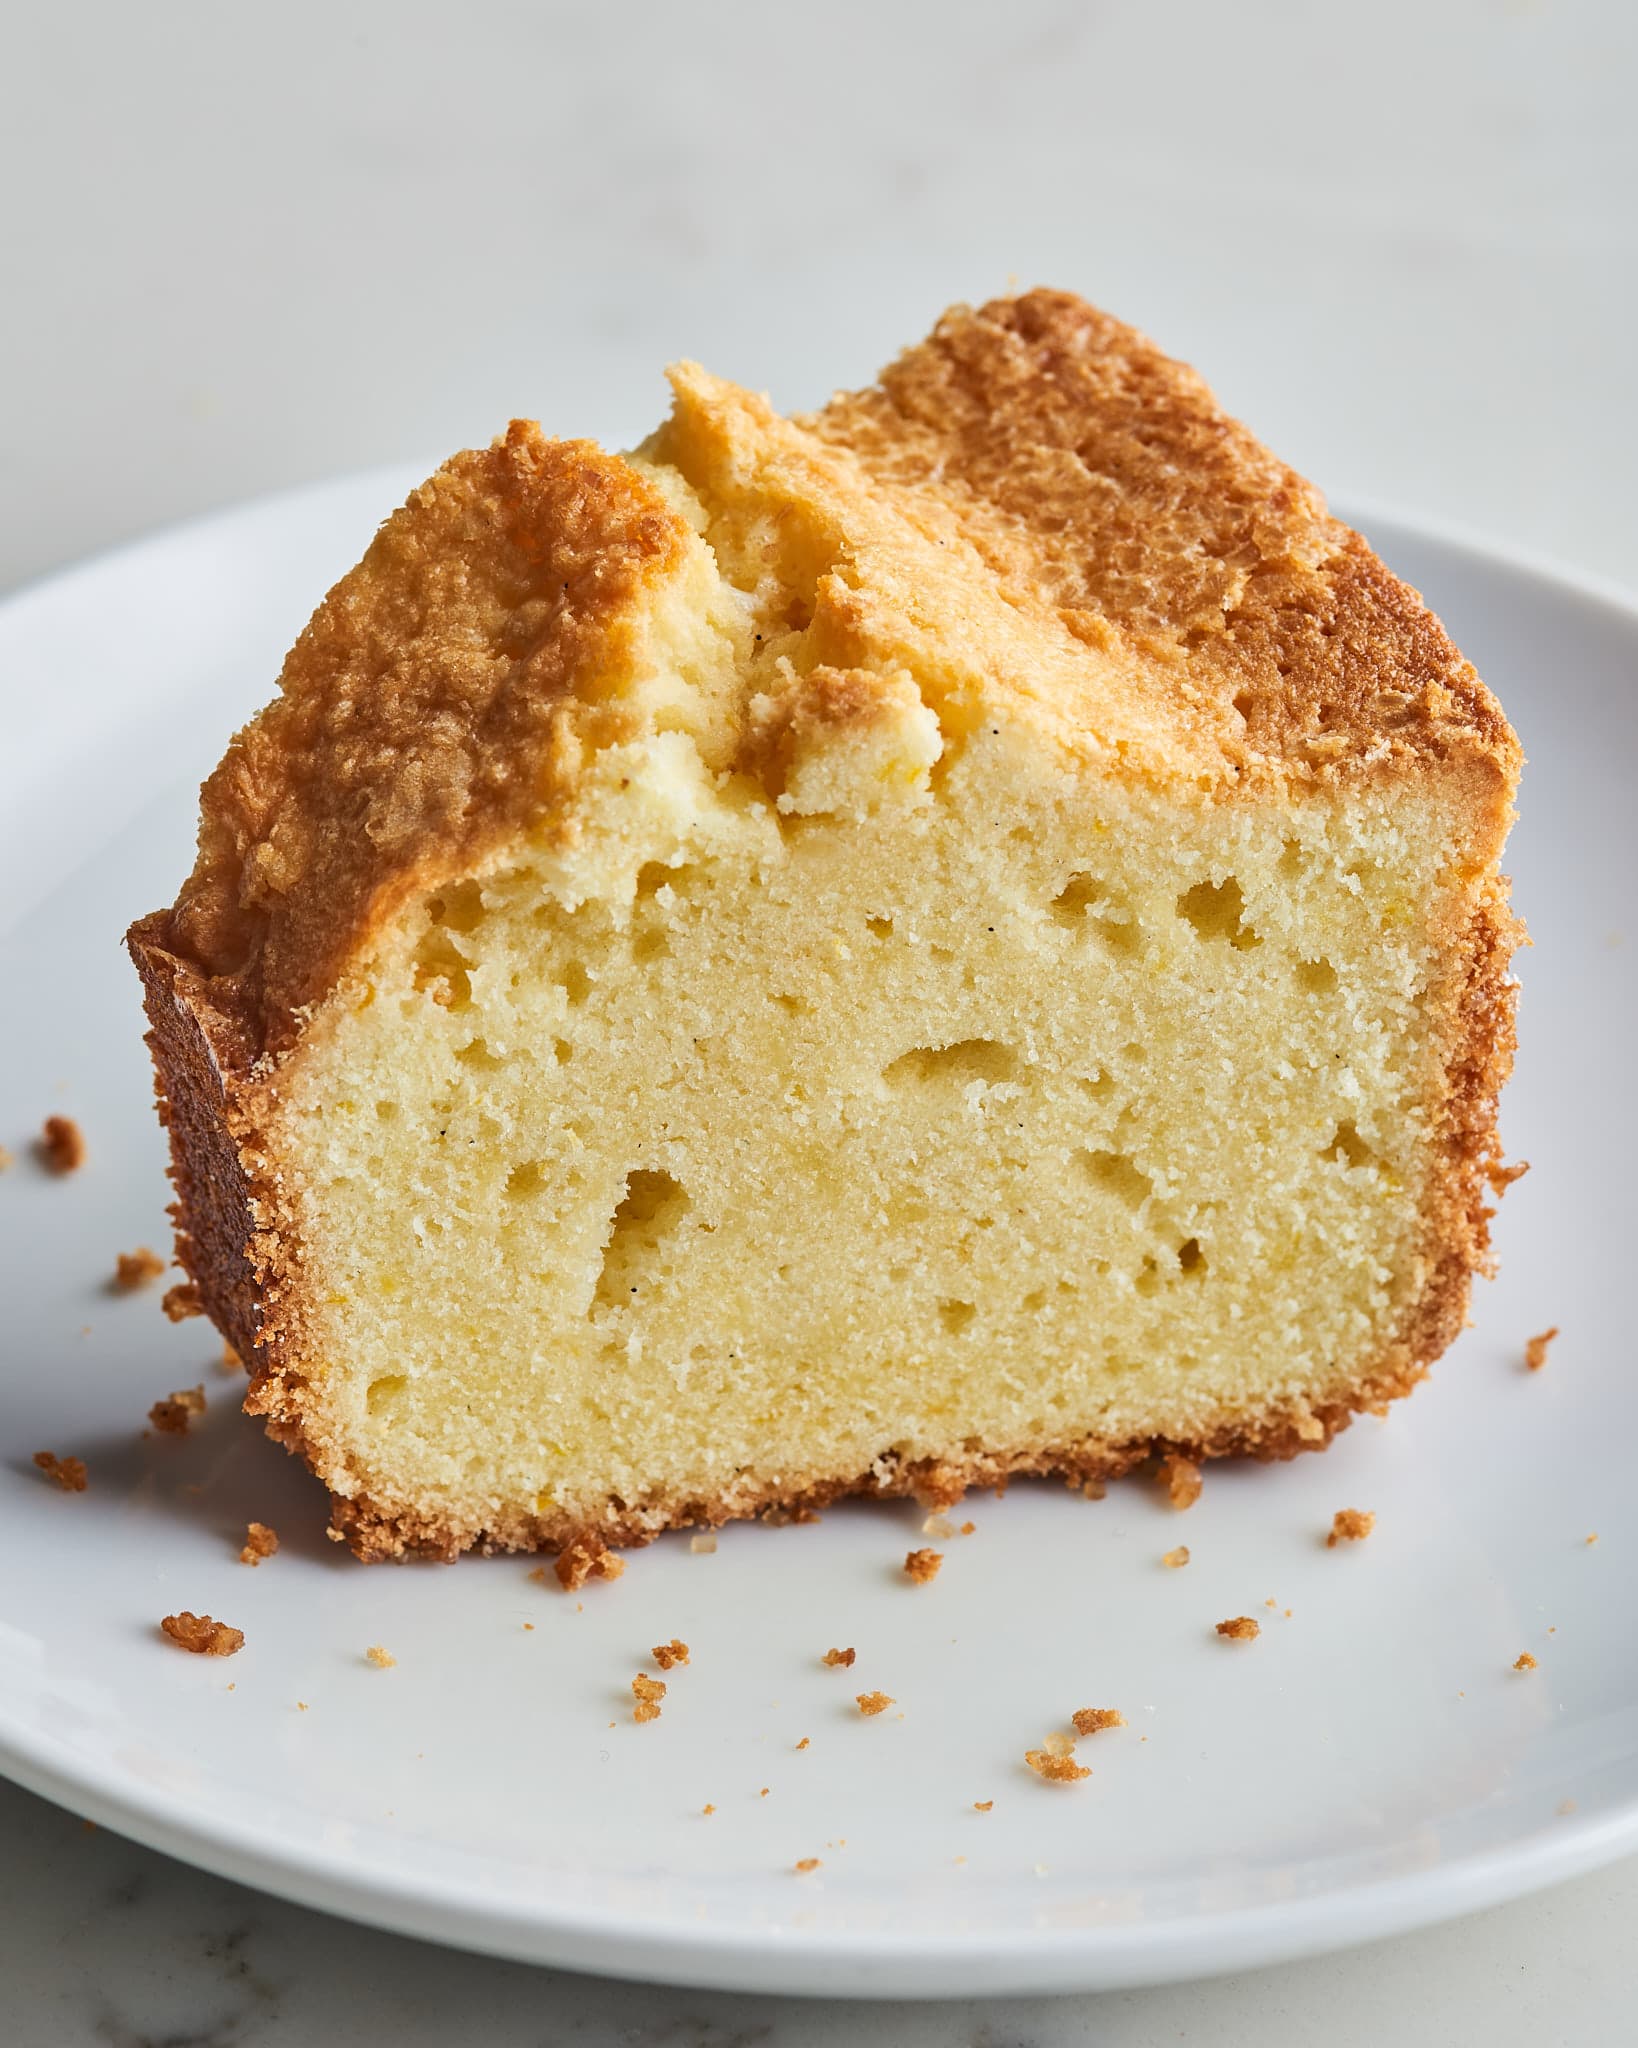 Perfect Pound Cake Recipe - How to Make the Best Pound Cake